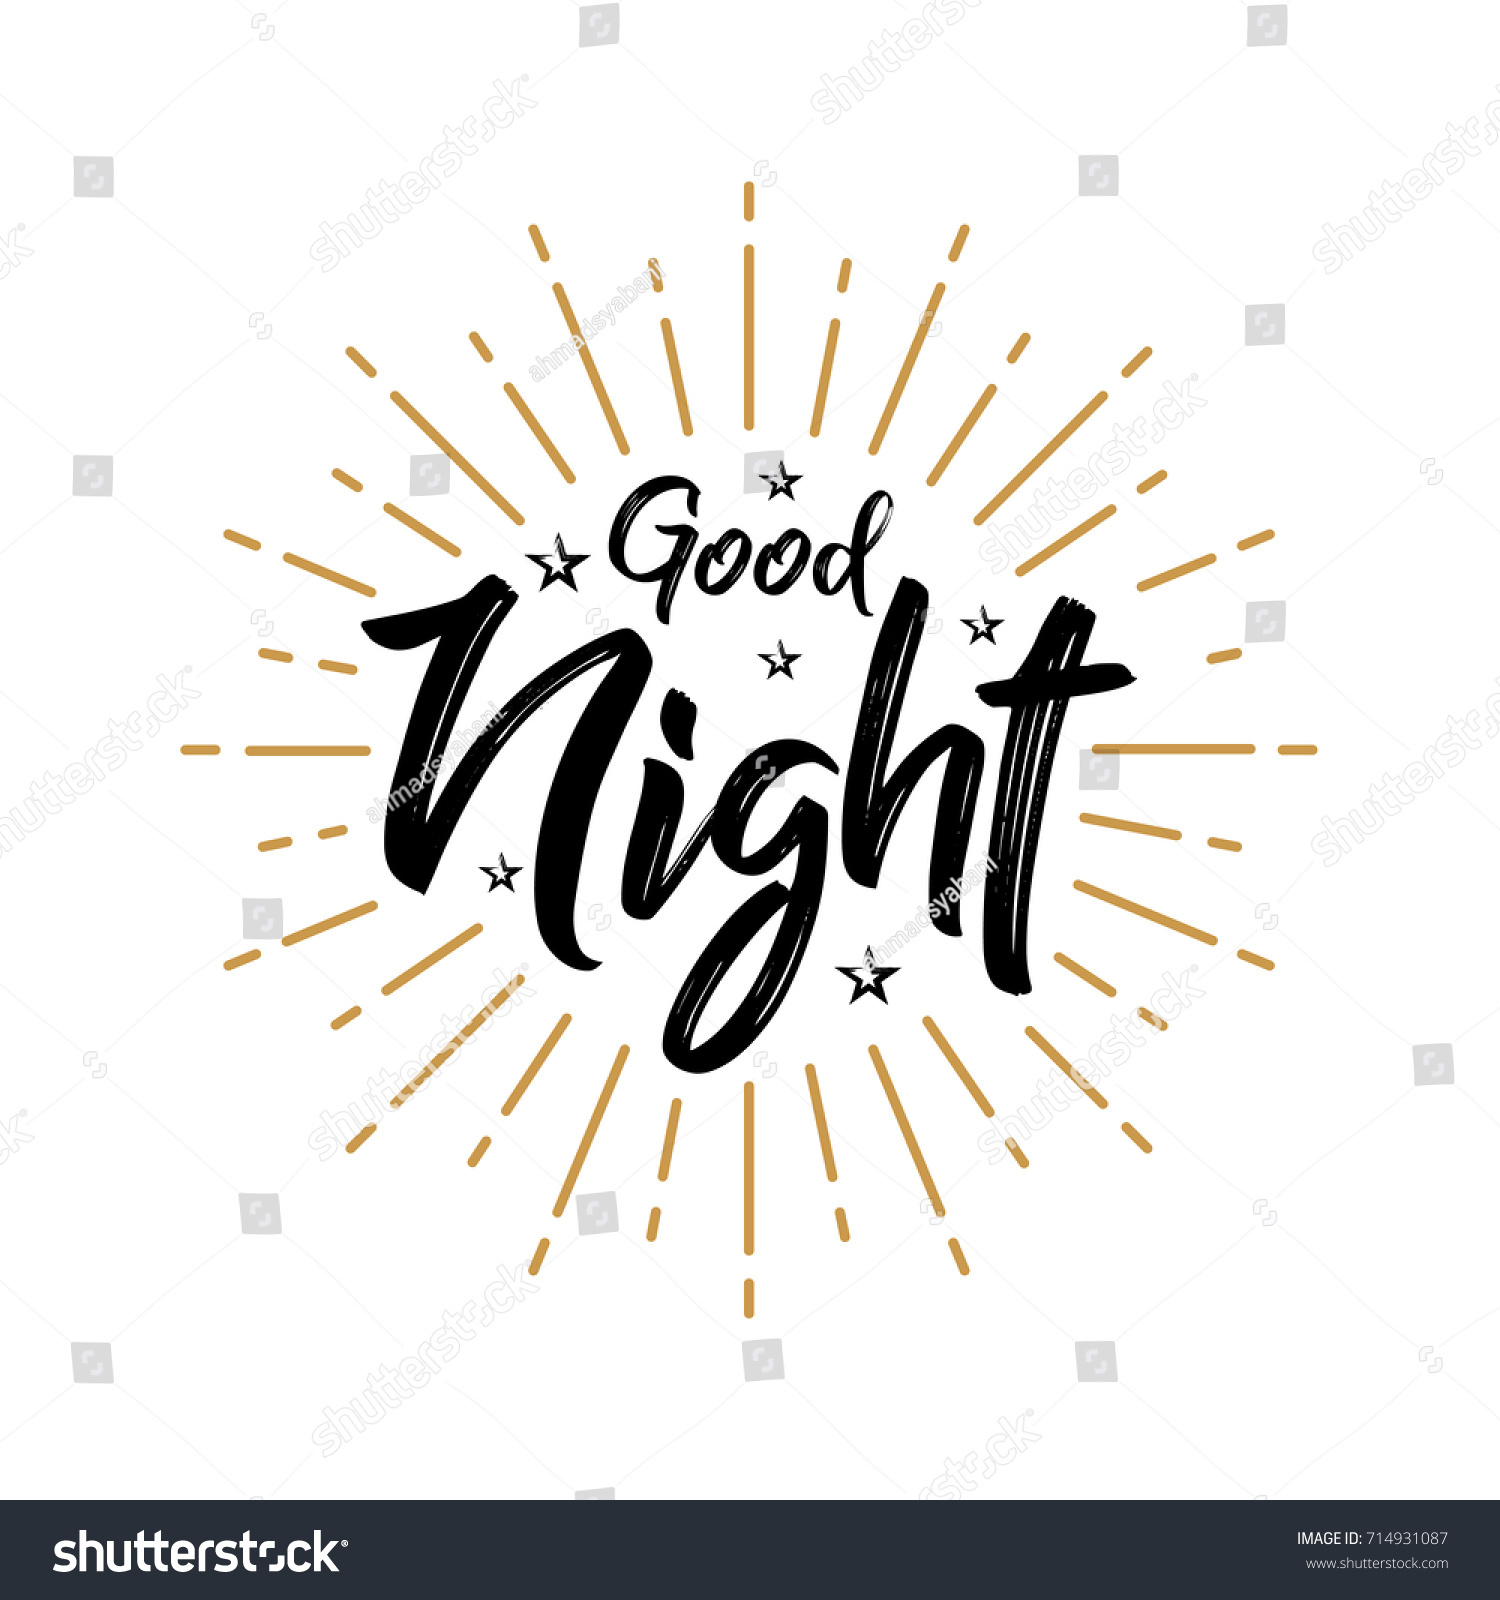 Good Night Fireworks Today Day Lettering Stock Vector (Royalty Free ...